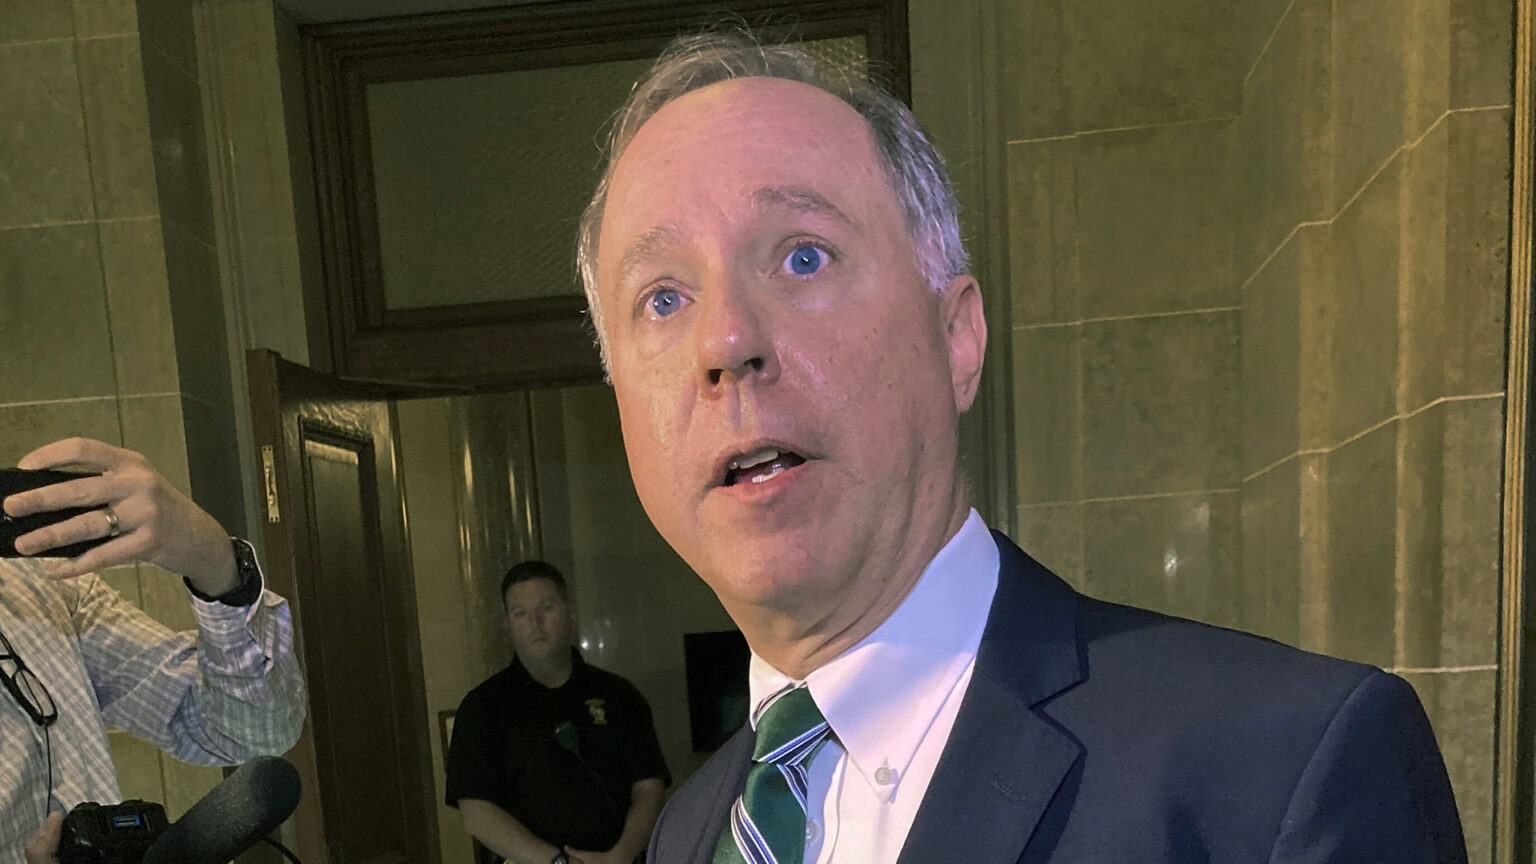 Robin Vos answers questions while standing in a hallway with marble-block walls.